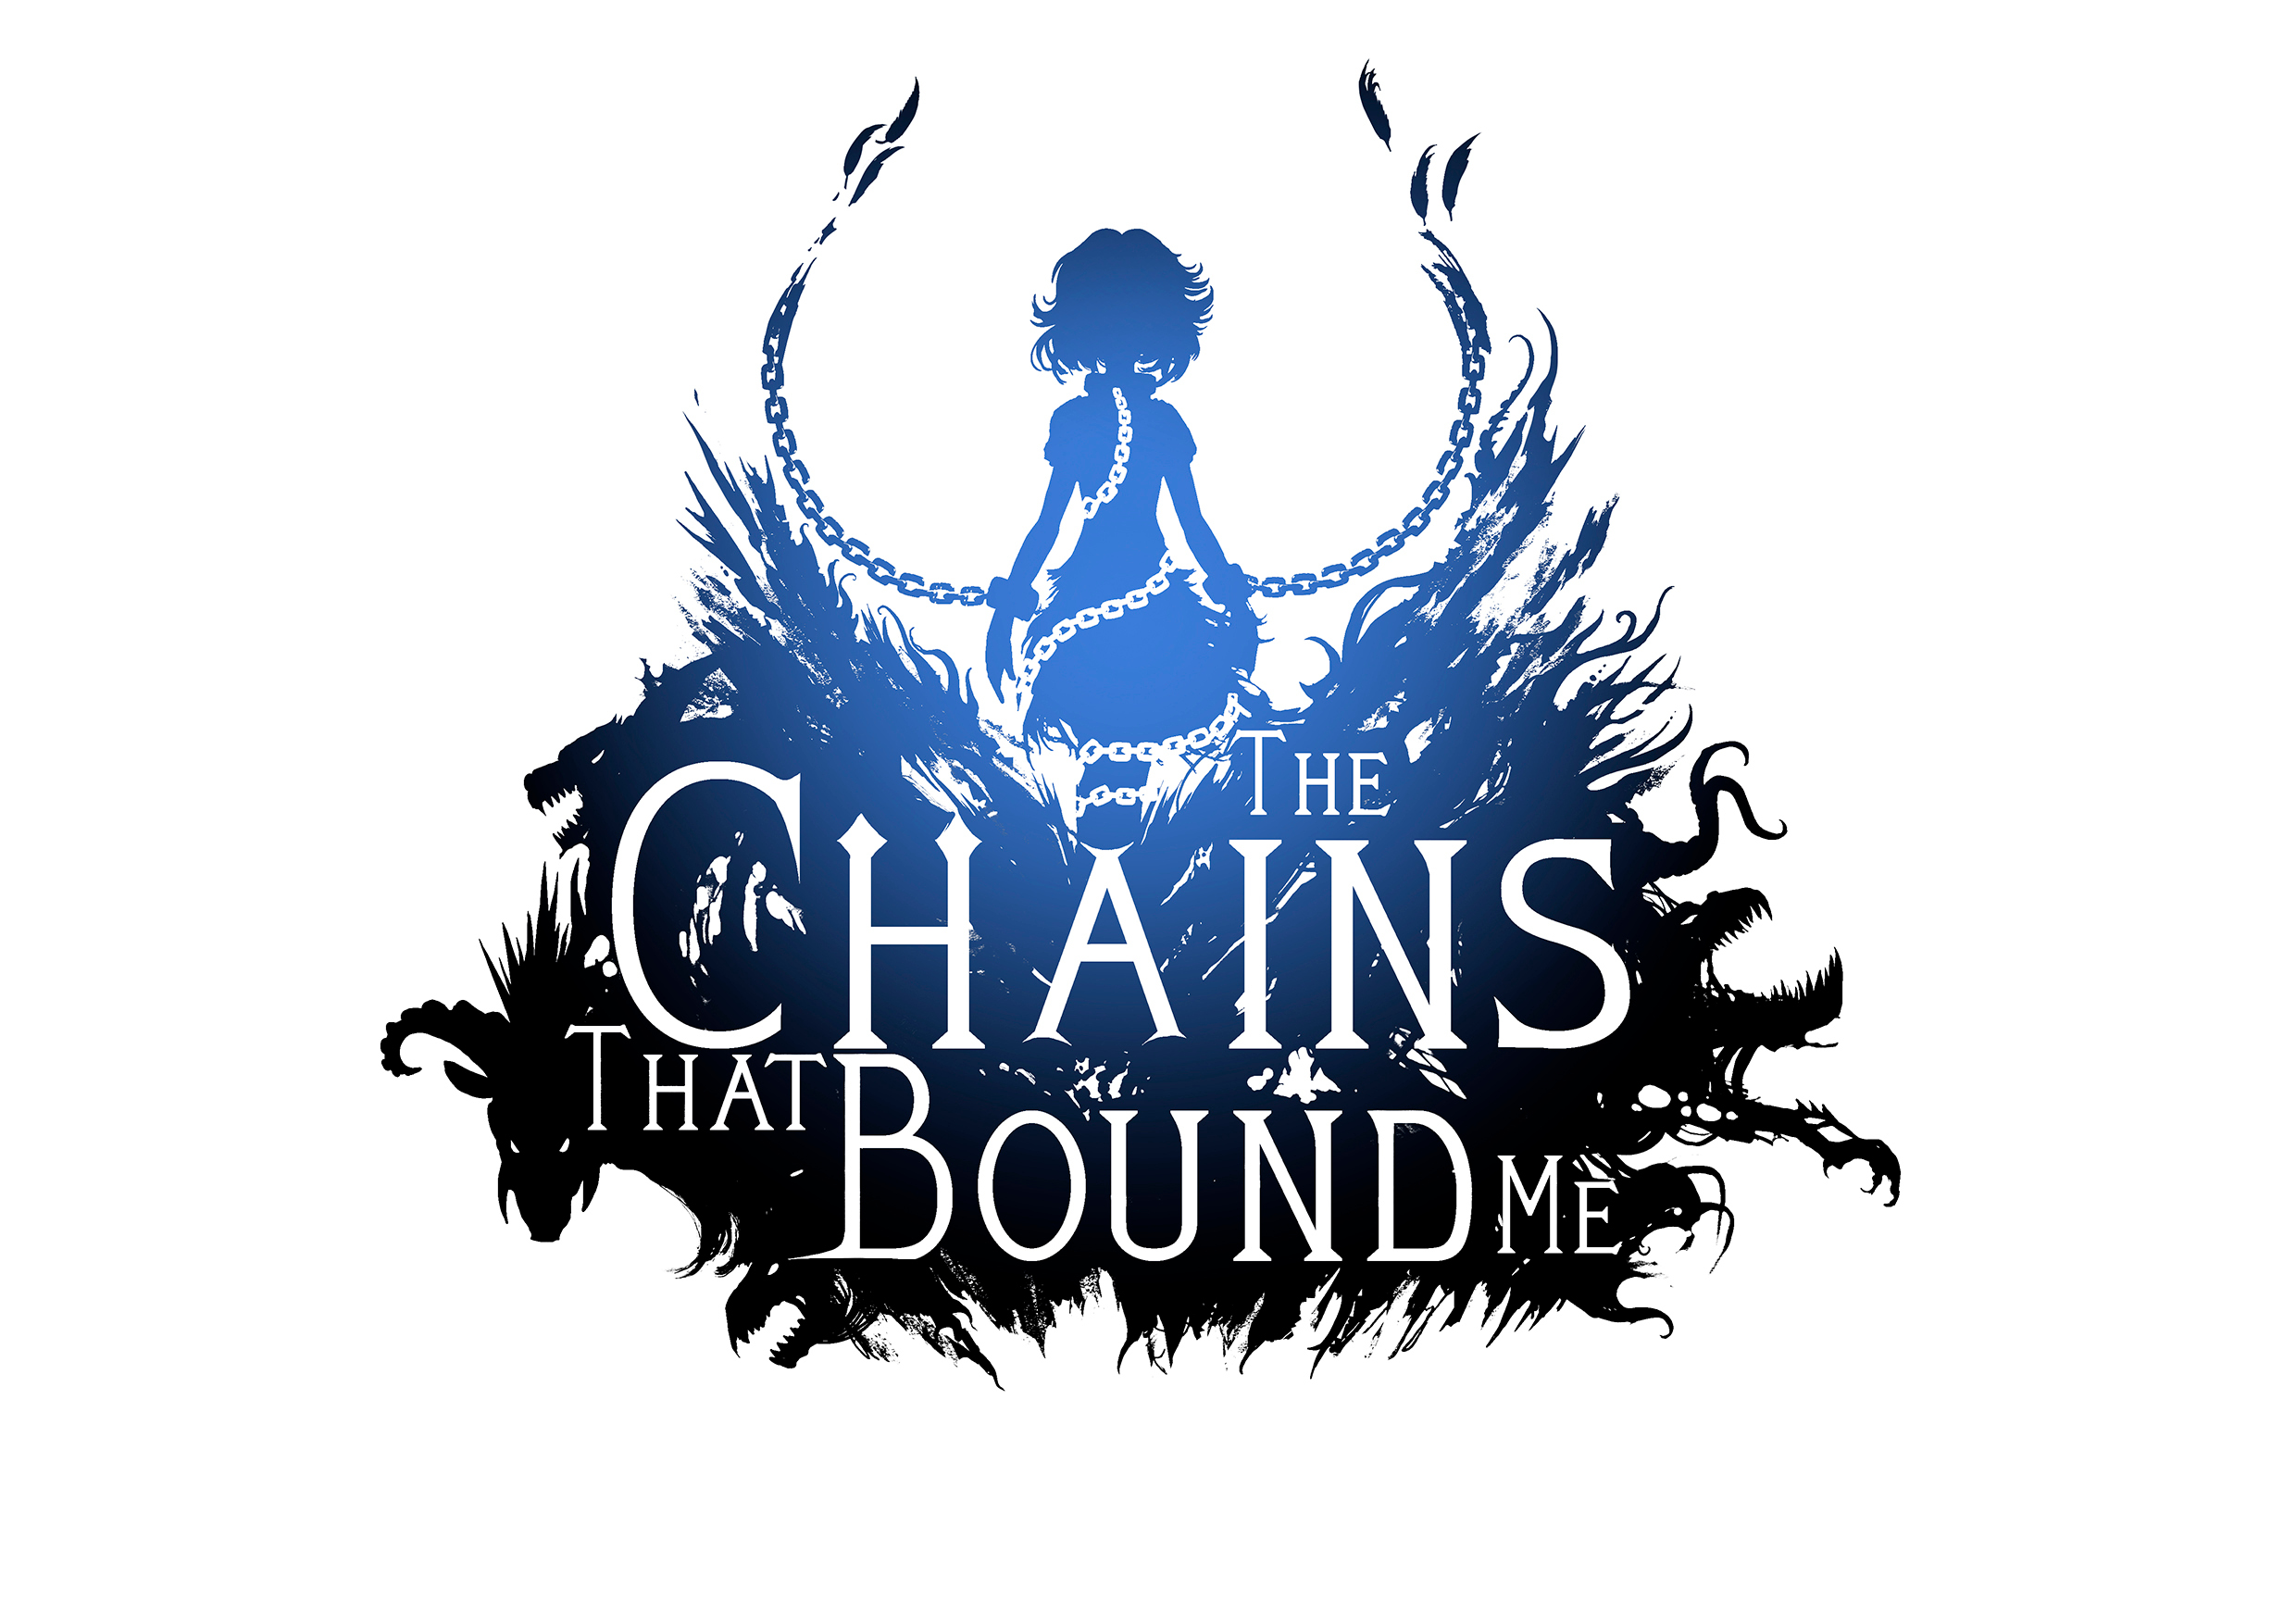 The Chains that Bound Me